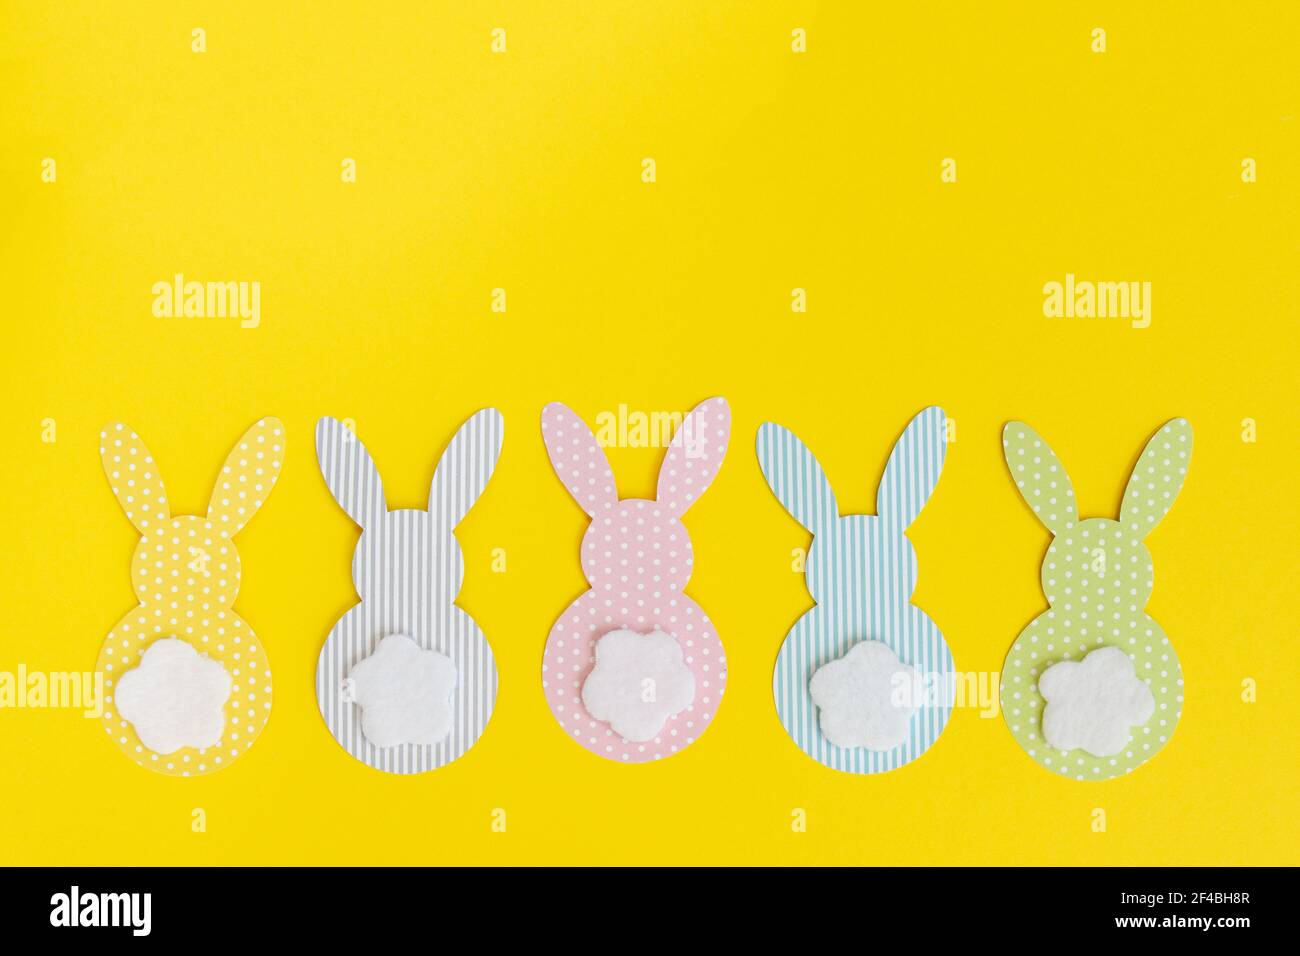 Easter paper bunnys isolated on yellow background. DIY holiday handicraft decoration of colorful rabbits. Concept: children's crafts for Easter. Top v Stock Photo